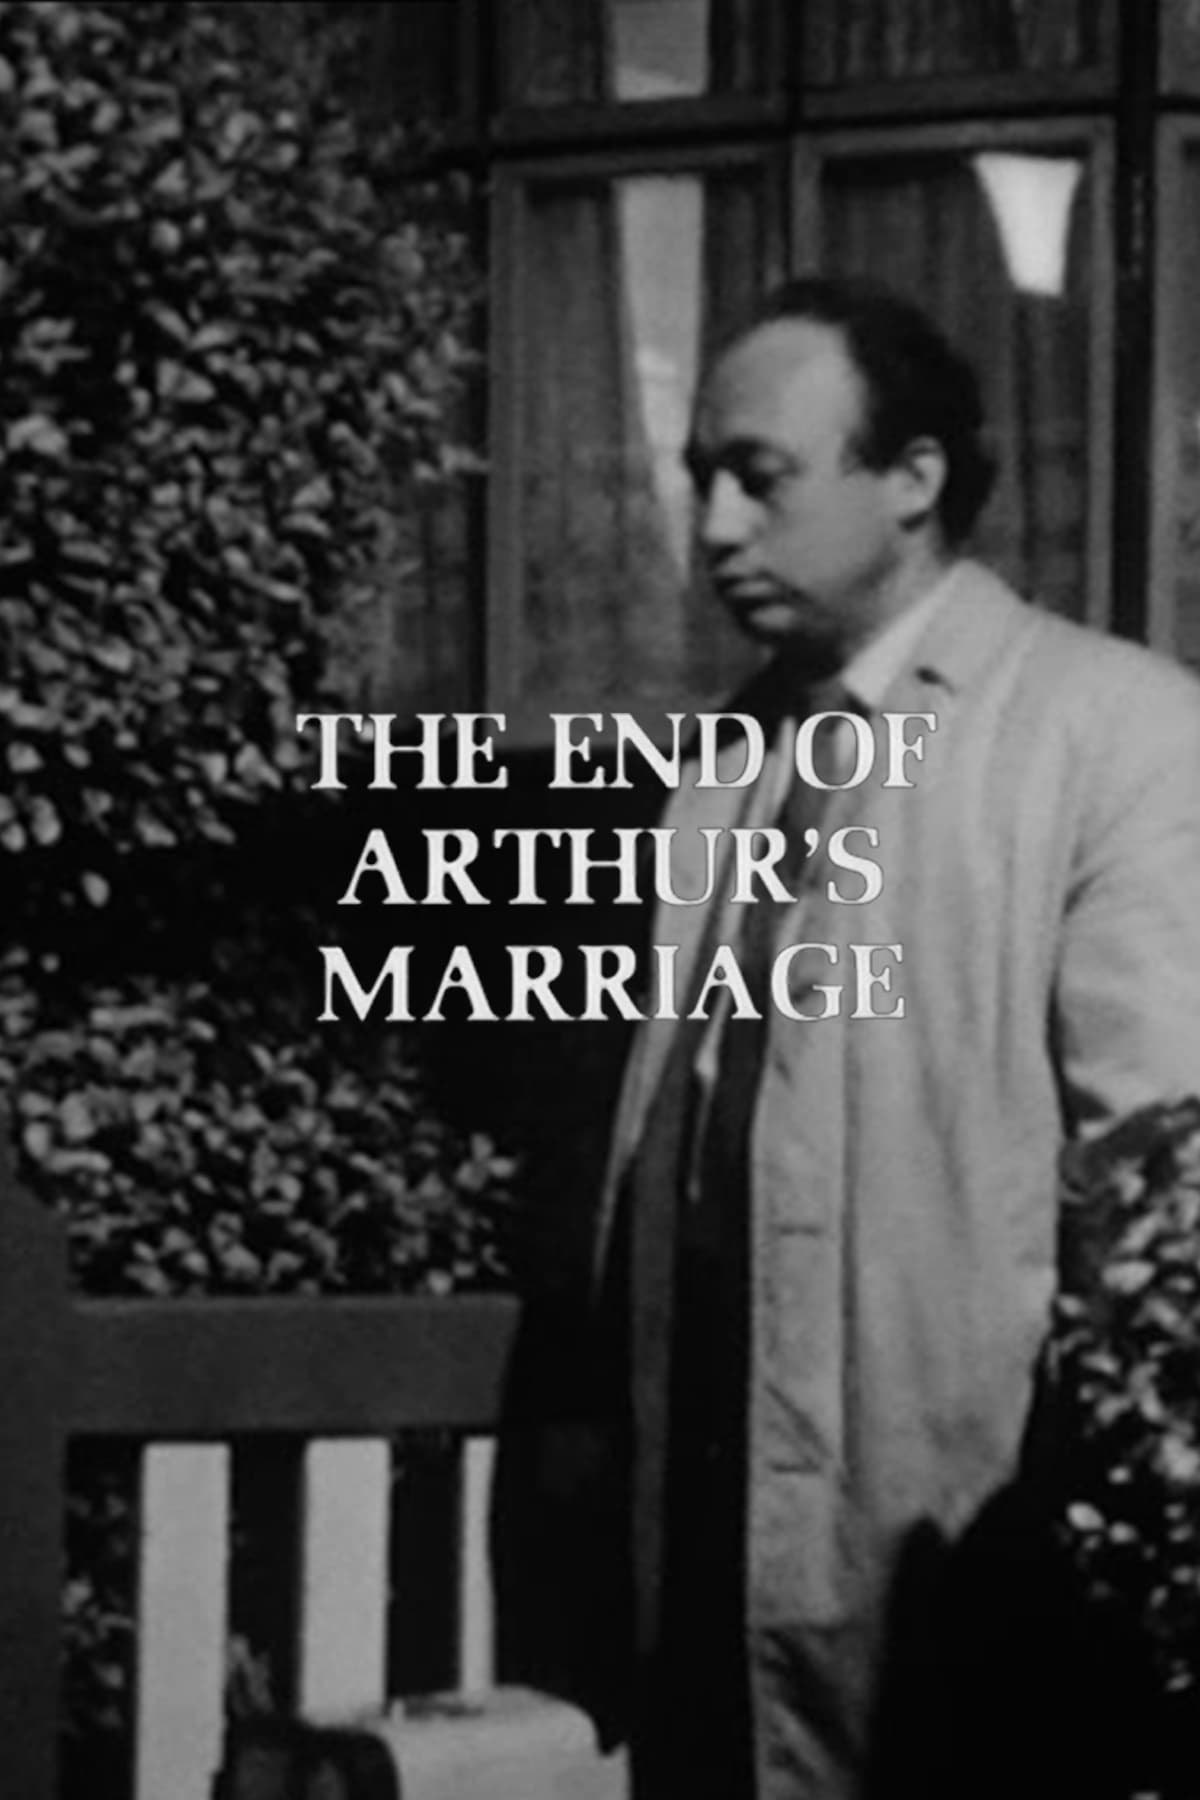 The End of Arthur's Marriage